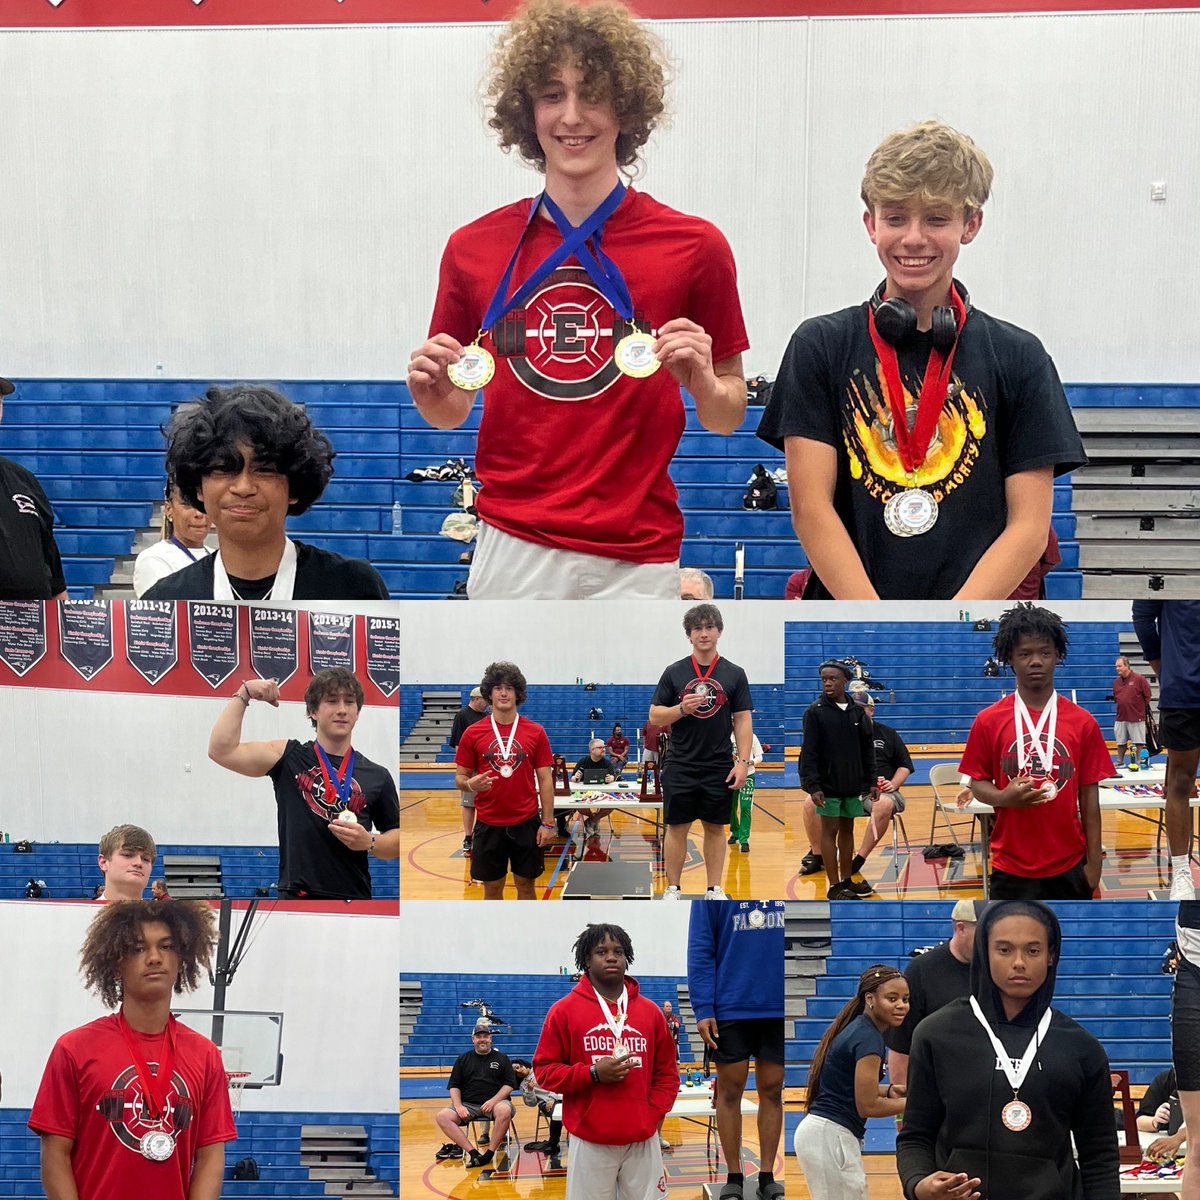 Boys Weightlifting took second place today in the FHSAA District Meet in both Olympic and Traditional.